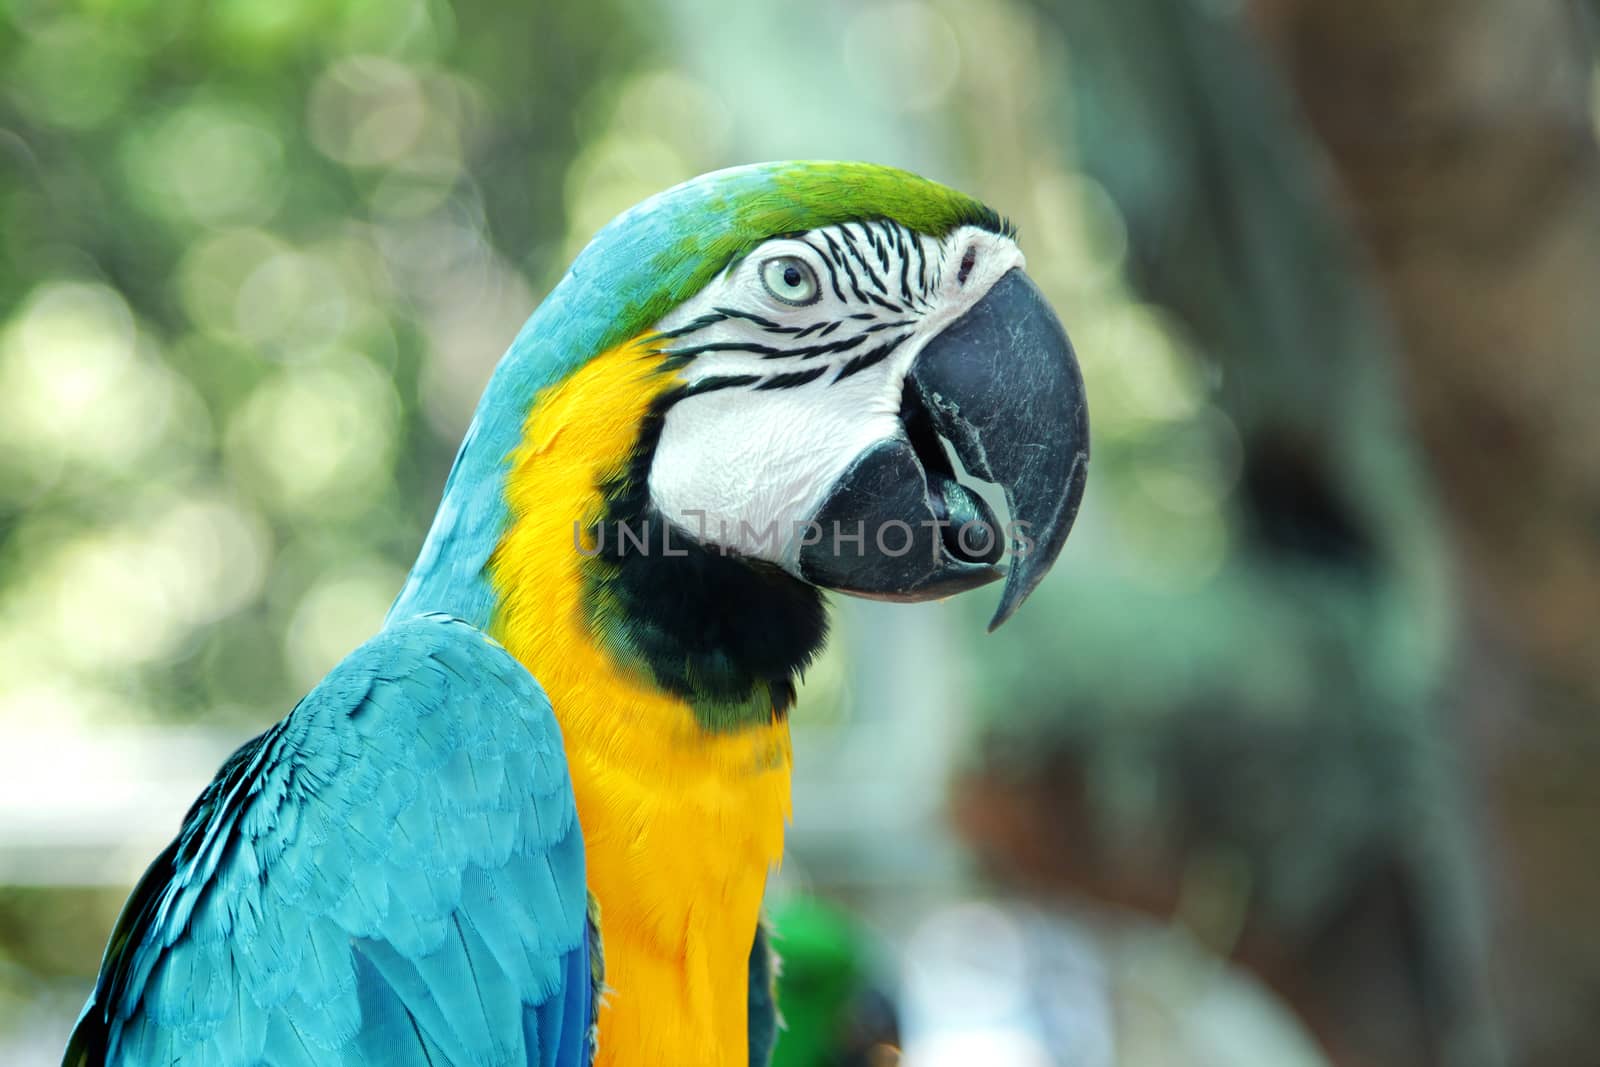 Colourful parrot bird by foto76